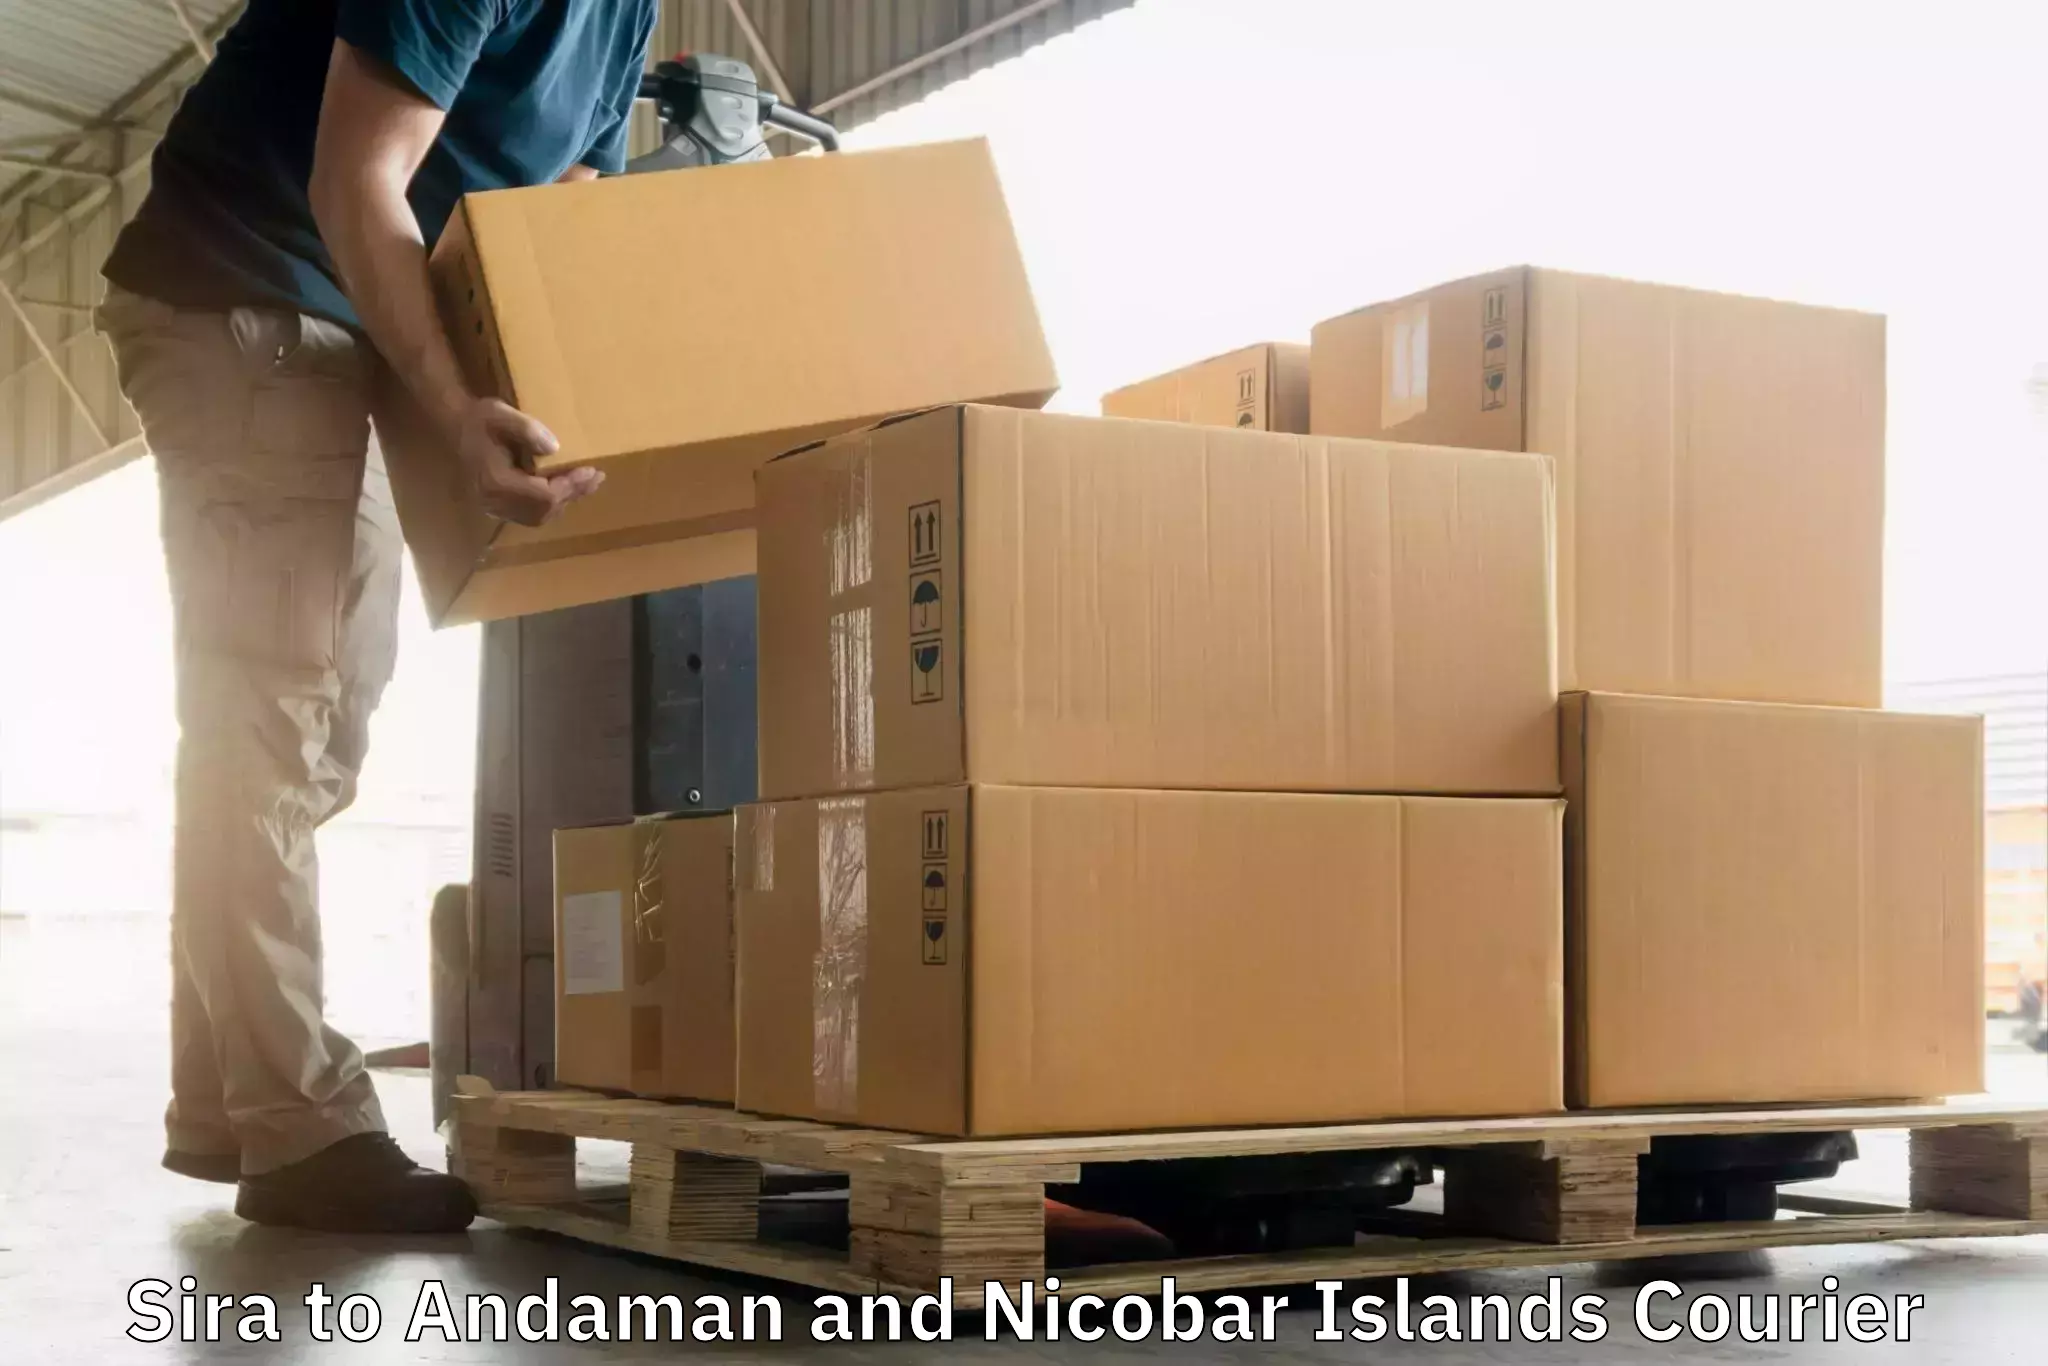 Parcel handling and care Sira to Andaman and Nicobar Islands